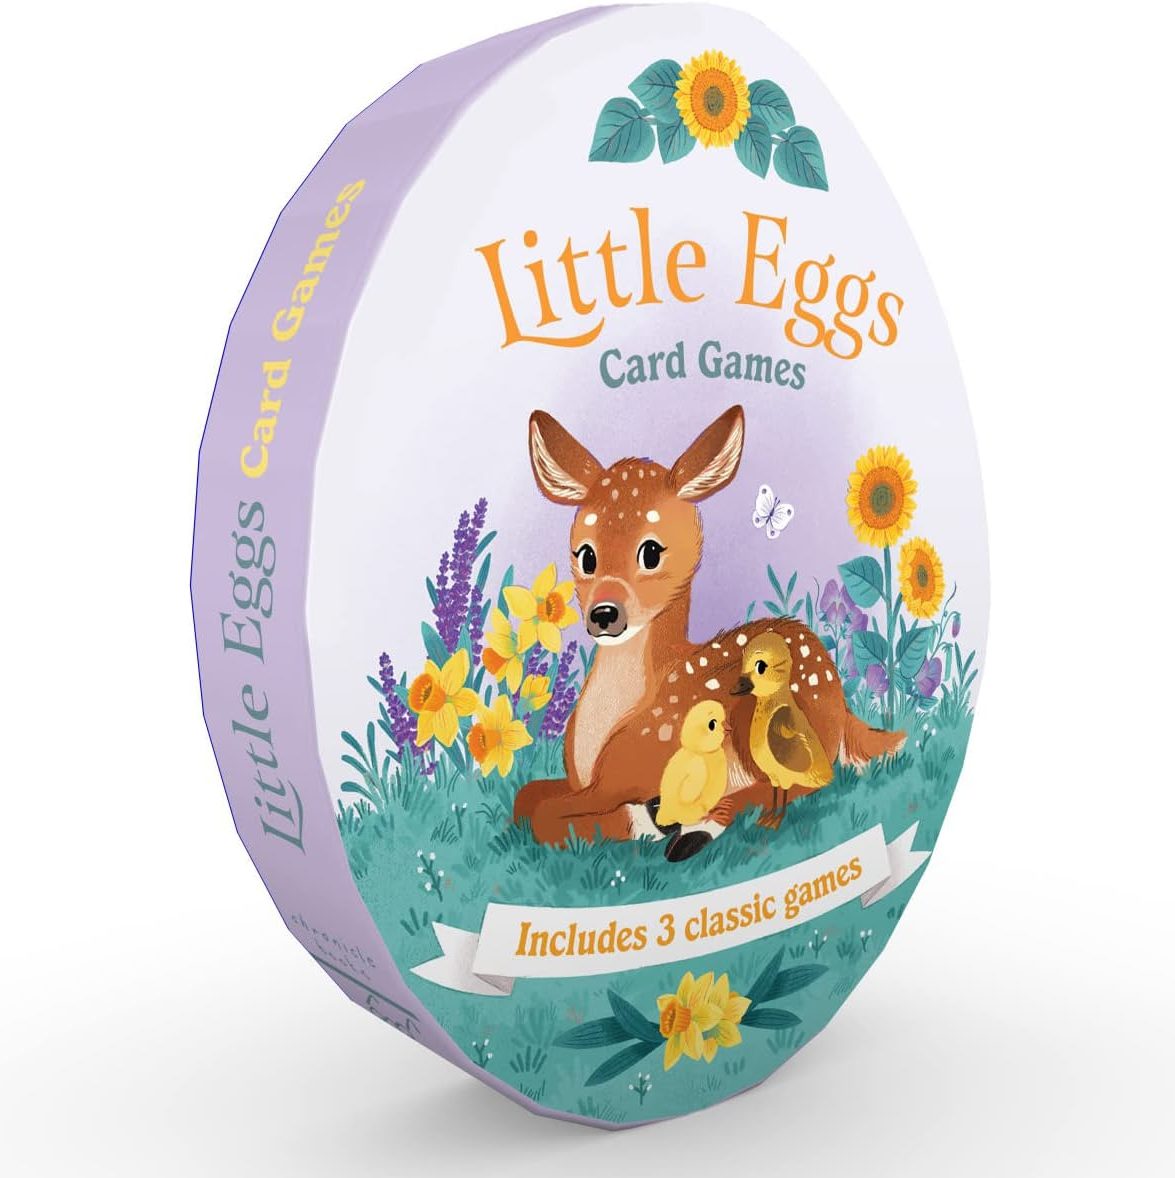 An egg-shaped playing card box standing upright with a flat bottom, adorned with a fawn, a chick, and a duckling sitting in the grass surrounded by purple and yellow flowers.